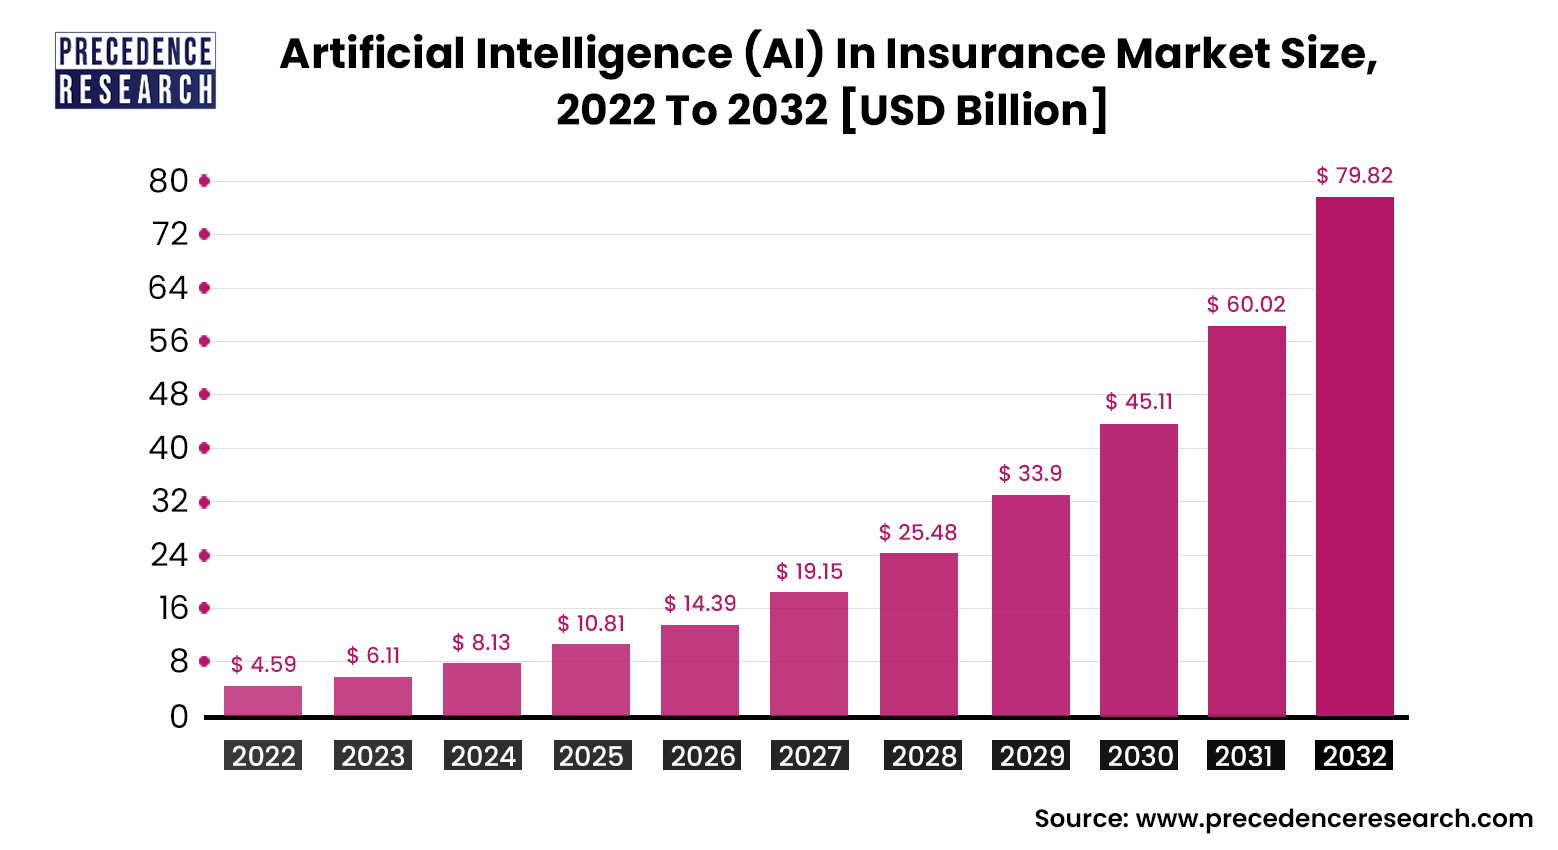 Artificial Intelligence in Insurance Market Size 2022 to 2023